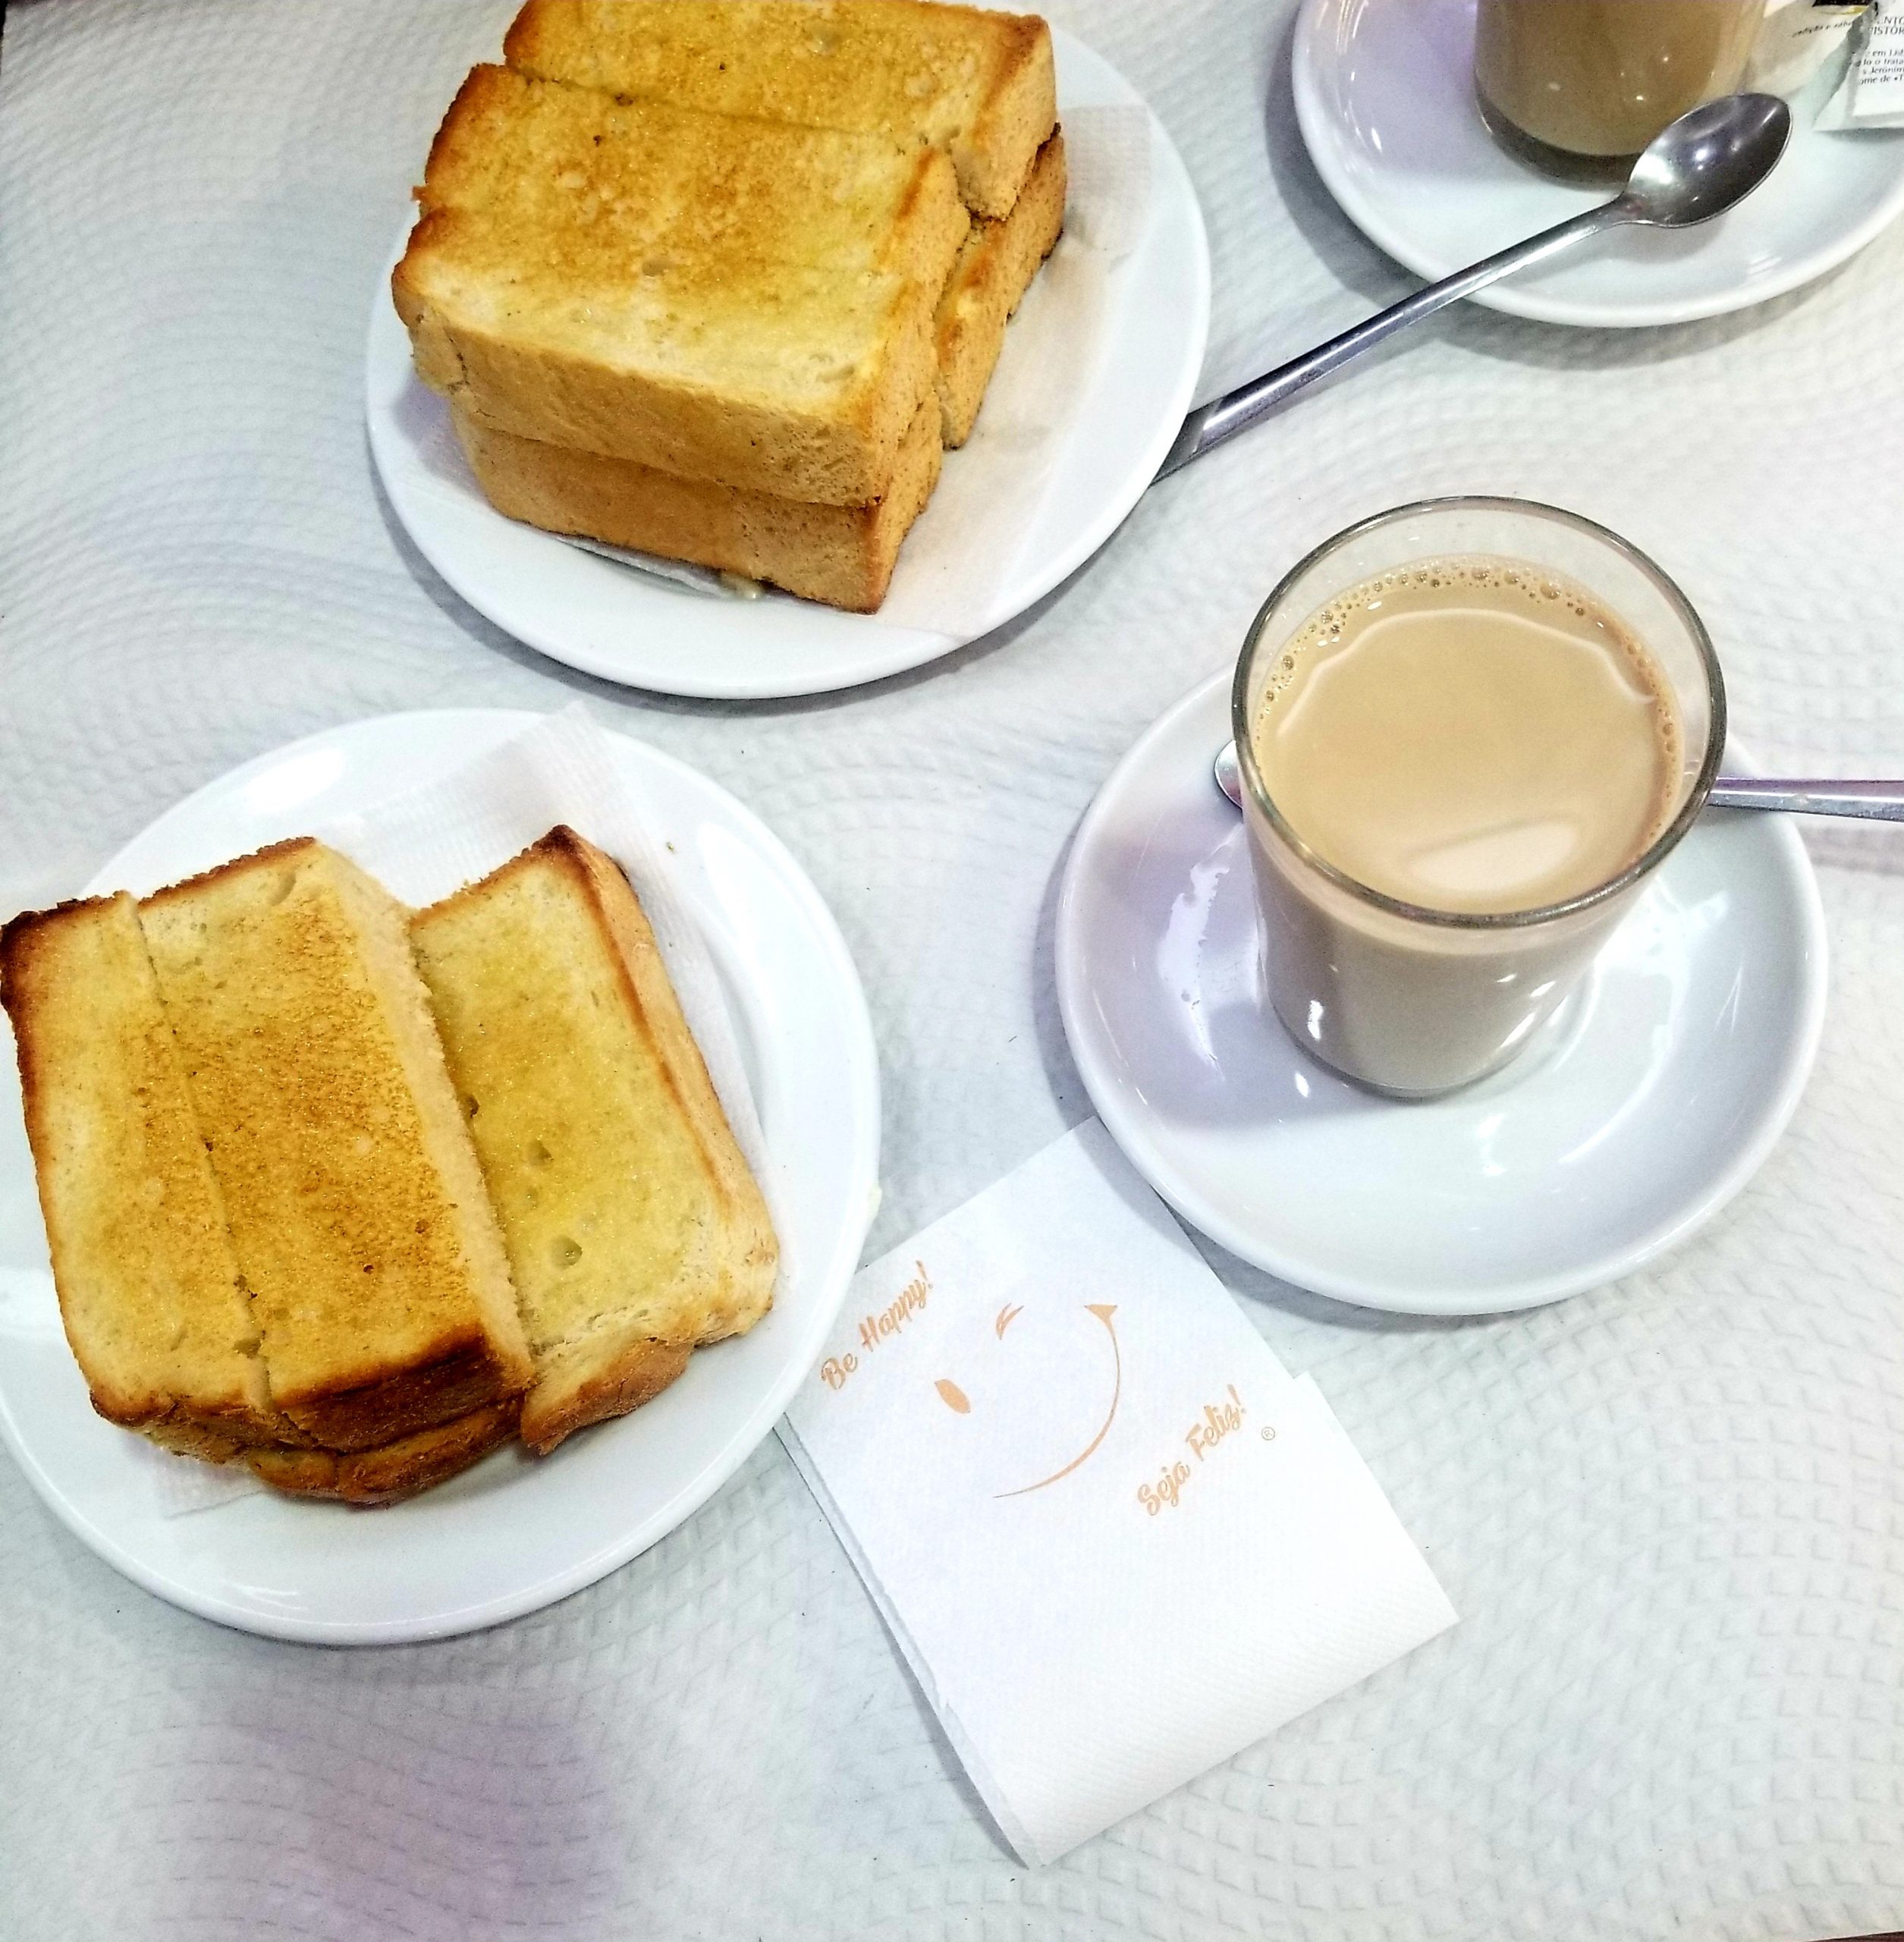 A cup of coffee ana a plate of bread, symbolizing the start of a morning habit for a 24-hour routine.